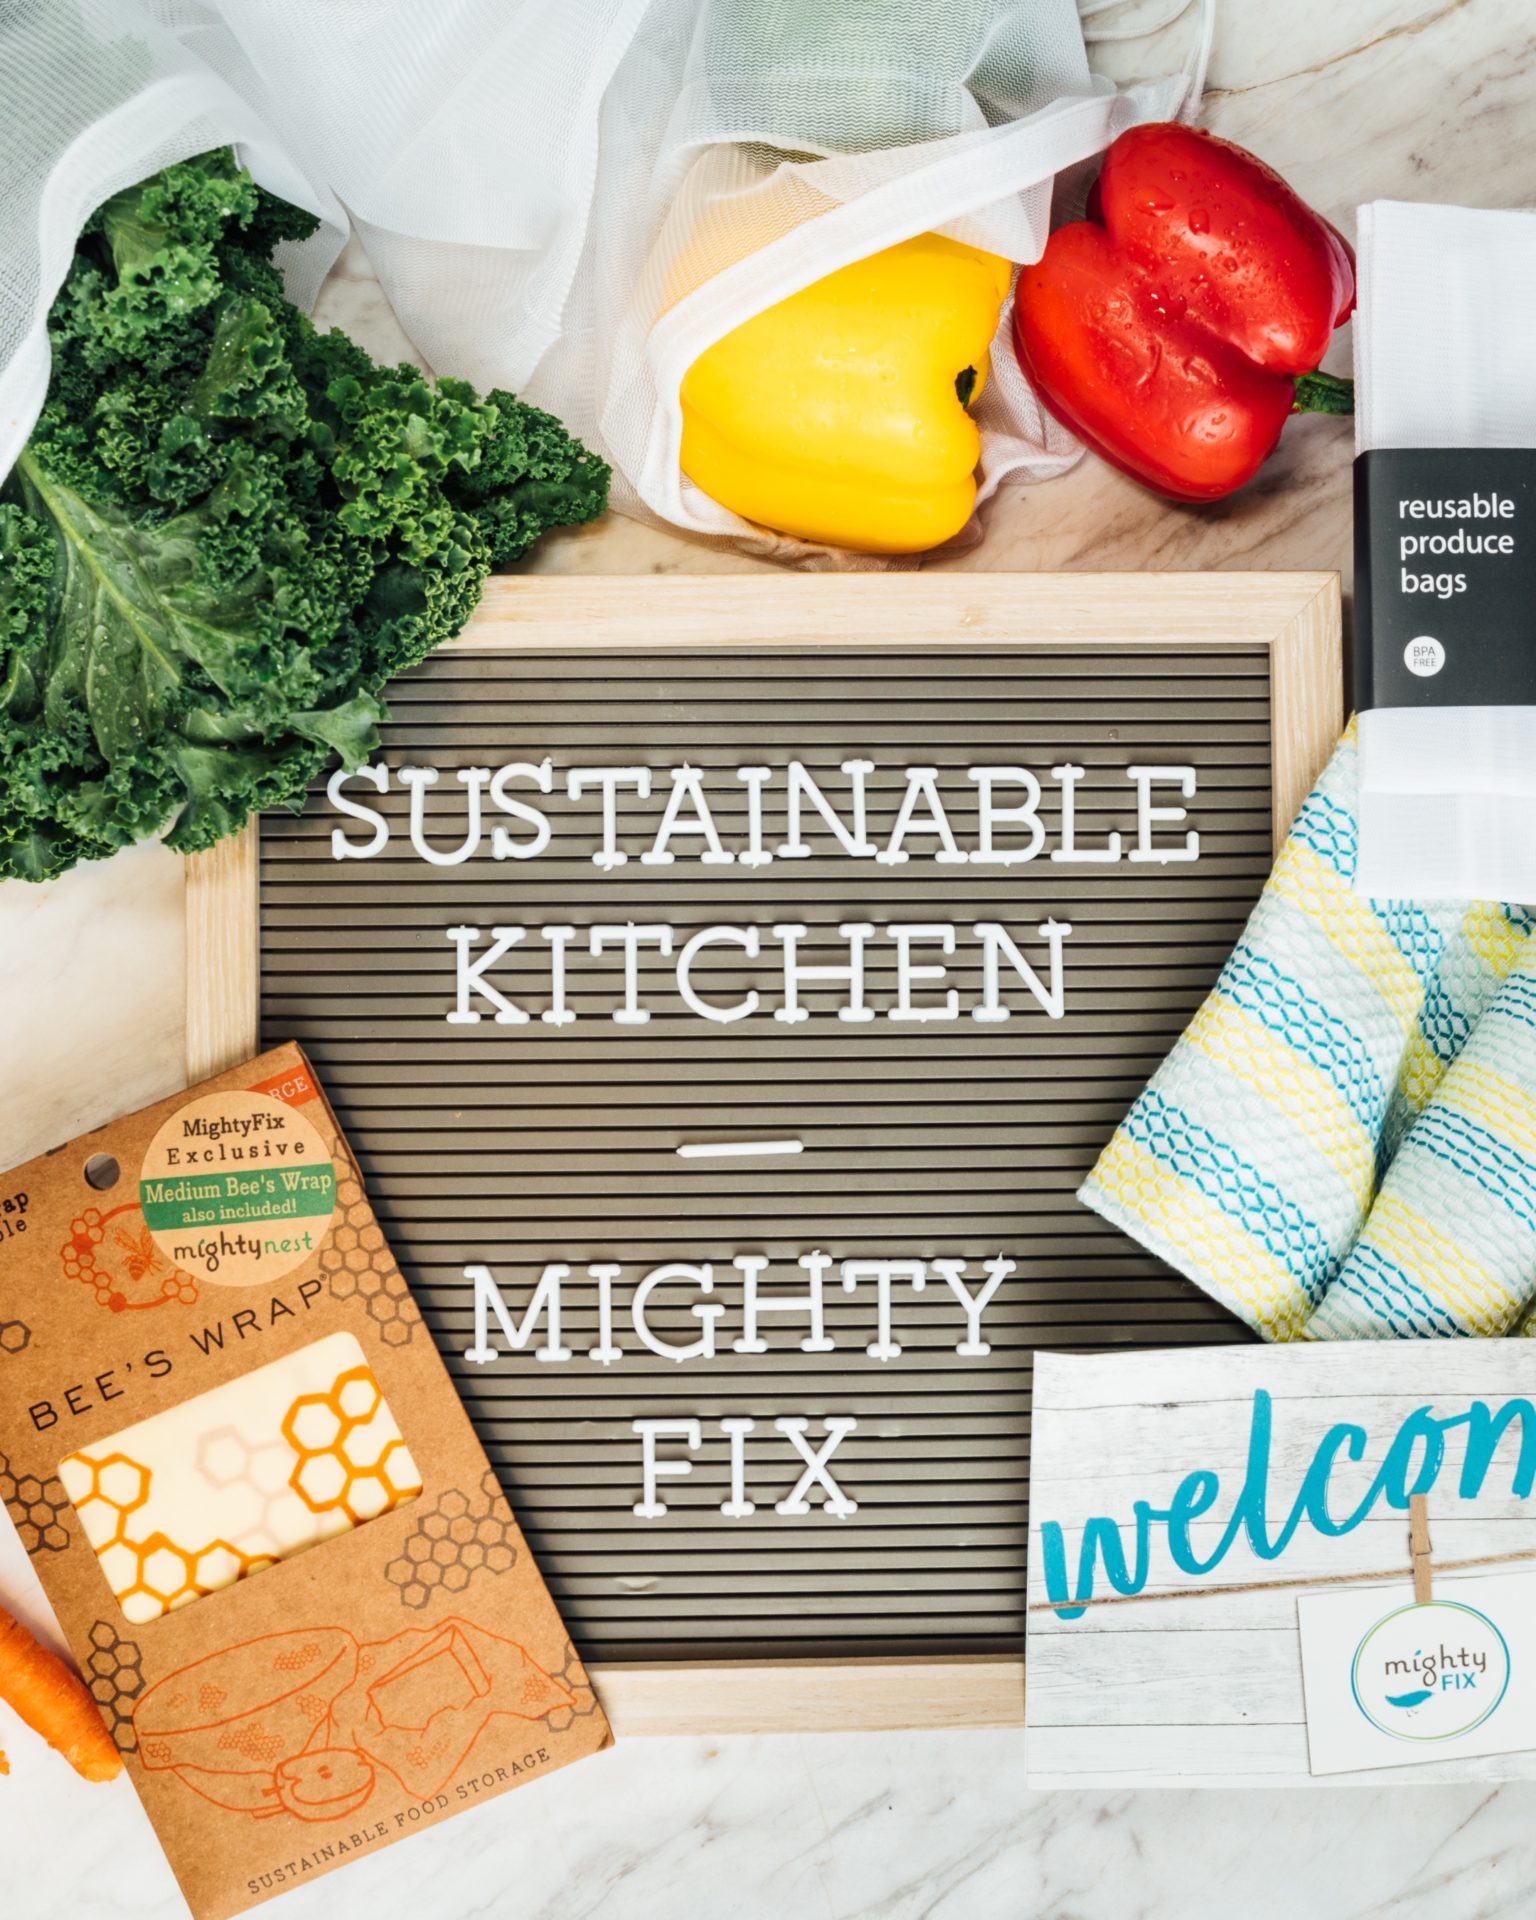 might nest might fix reusable store bags eco friendly kitchen products sustainable kitchen products